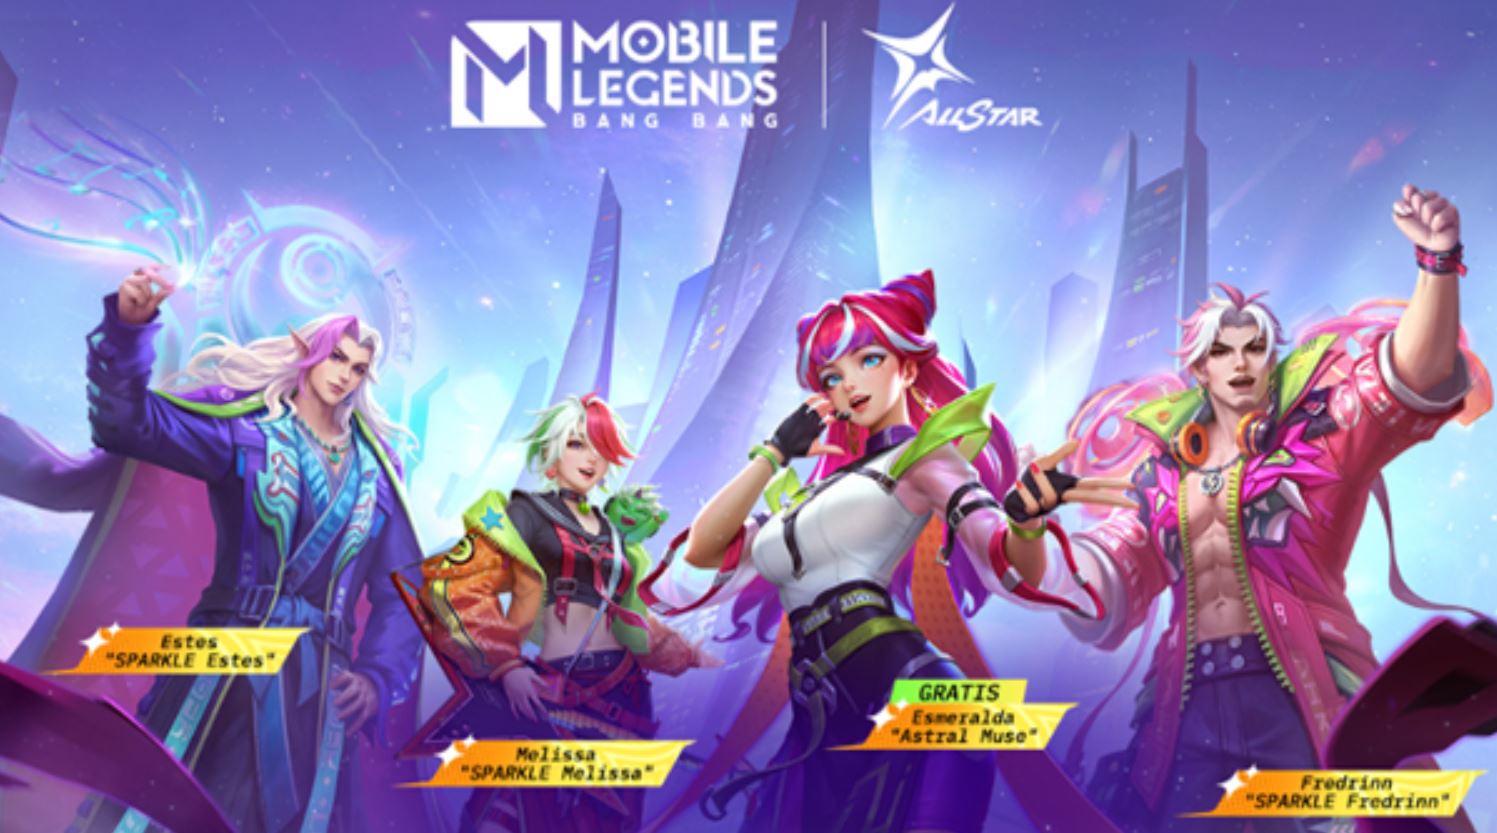 Get ready to mark your calendars because Mobile Legends Allstar 2024 is just around the corner, and it's going to be epic!